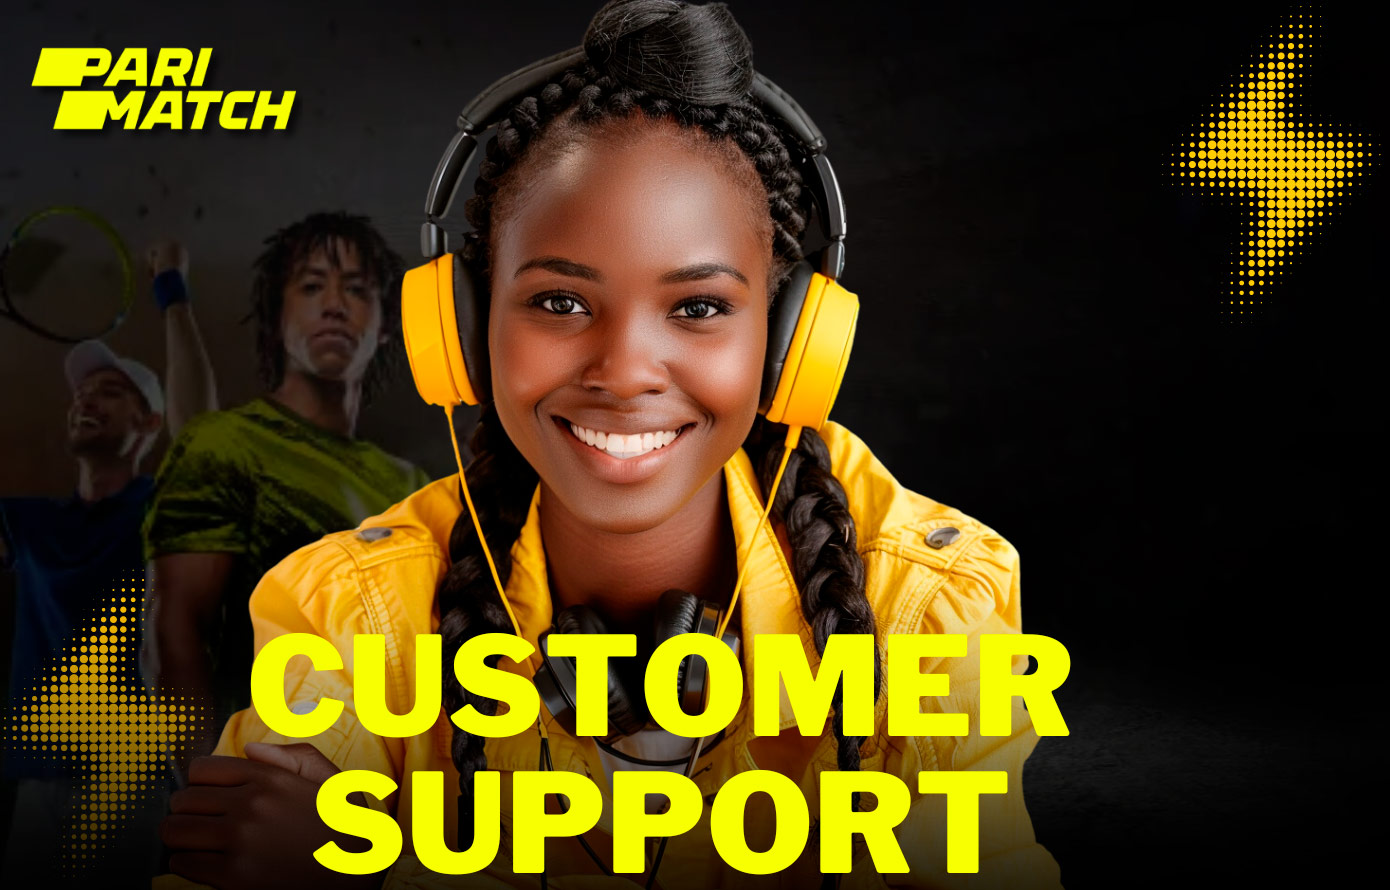 Parimatch offers customer support